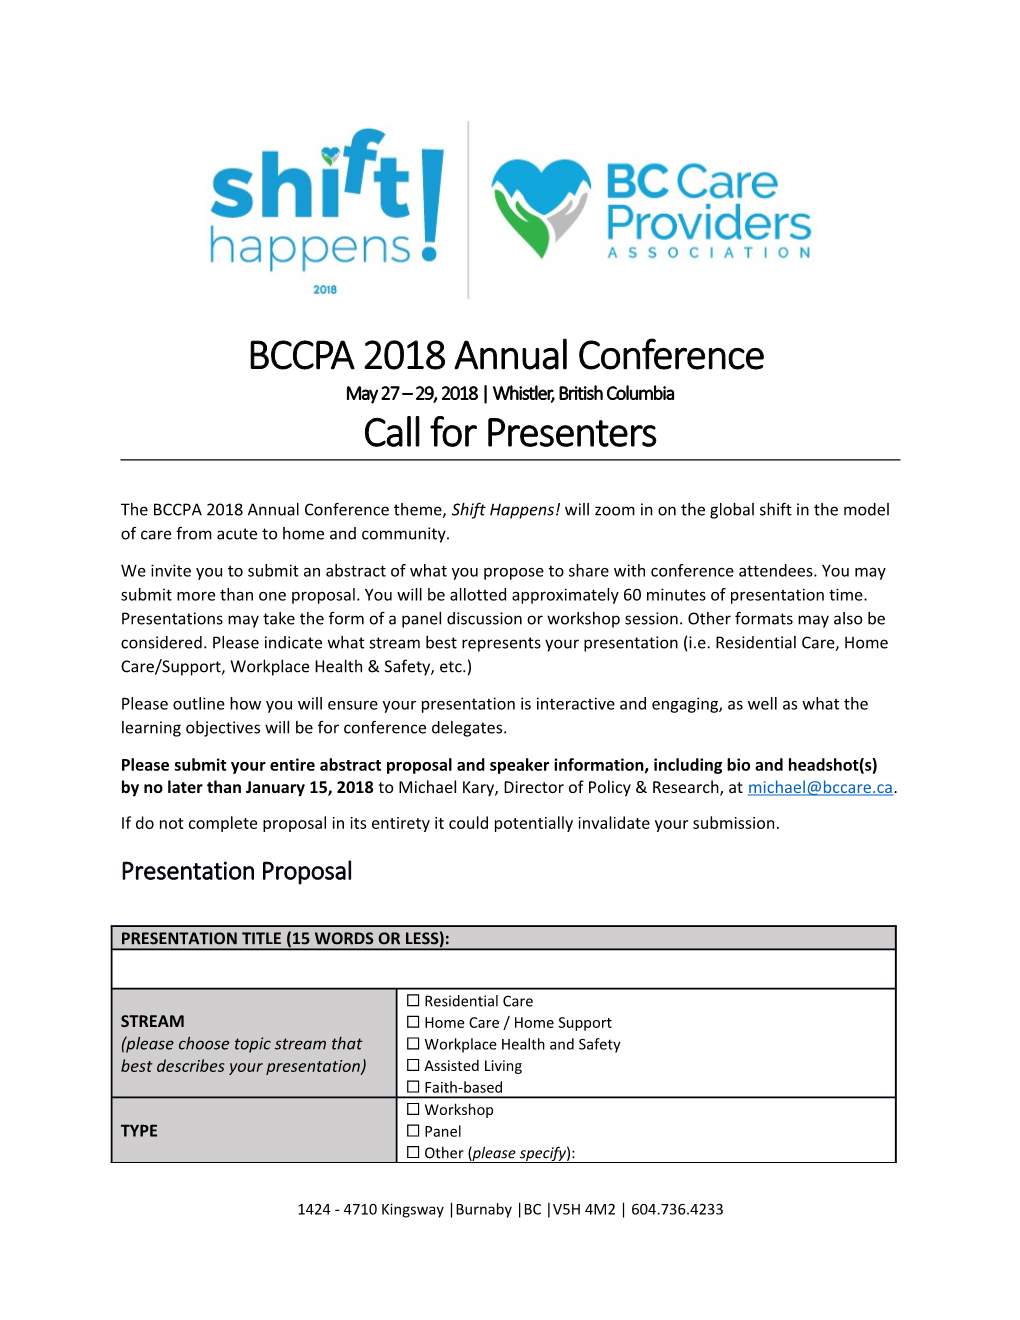 BCCPA 2018 Annual Conference May 27 29, 2018 Whistler, British Columbia